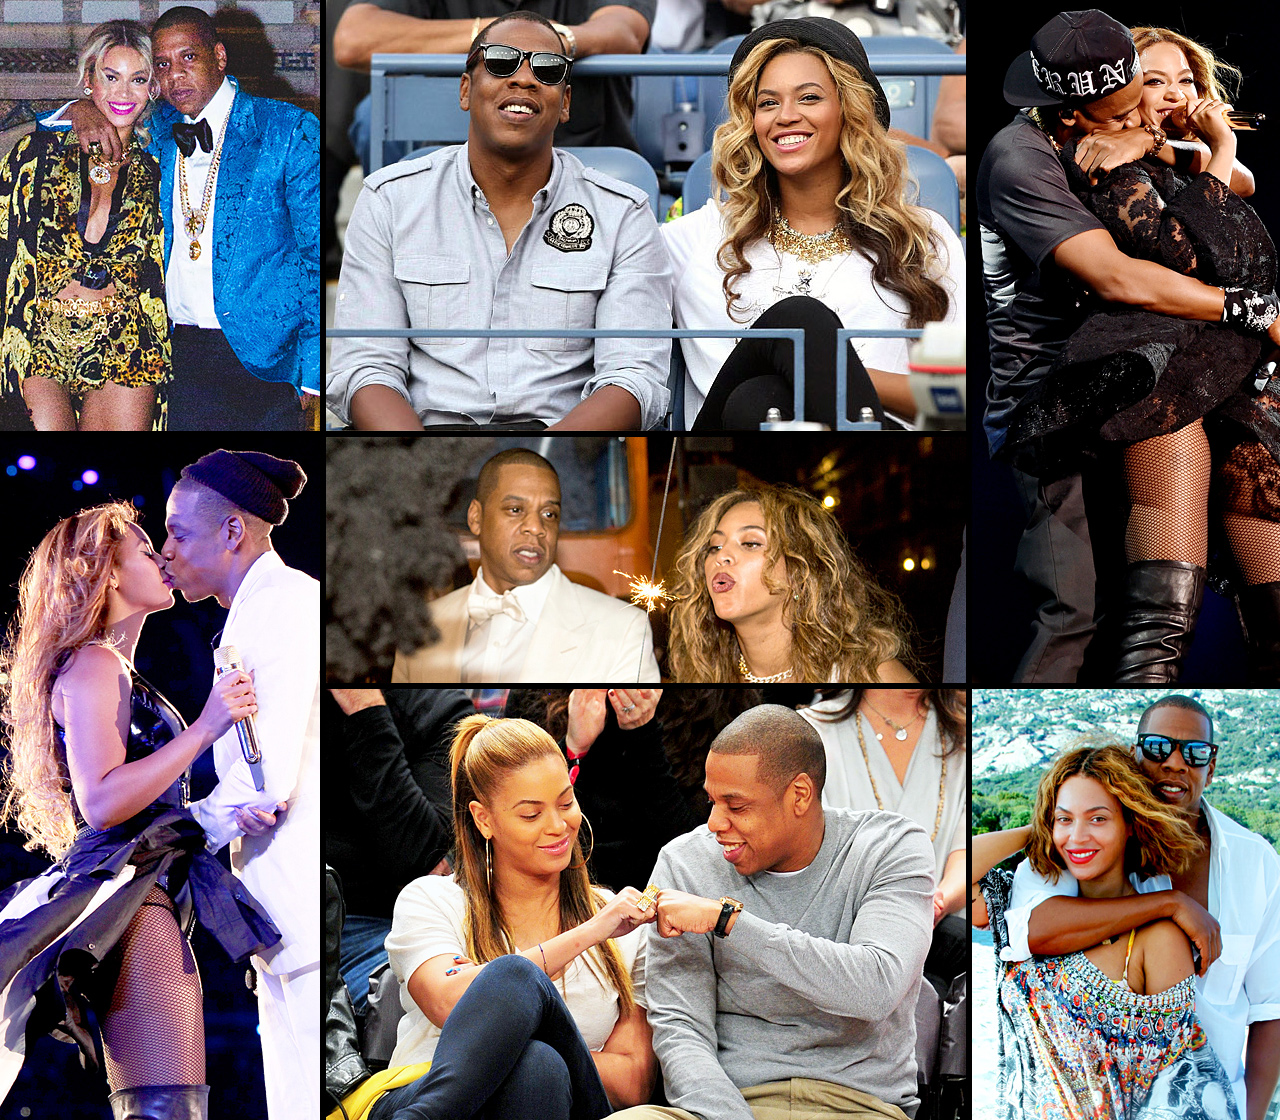 Beyonce, Jay-Zs Relationship Through the Years pic pic